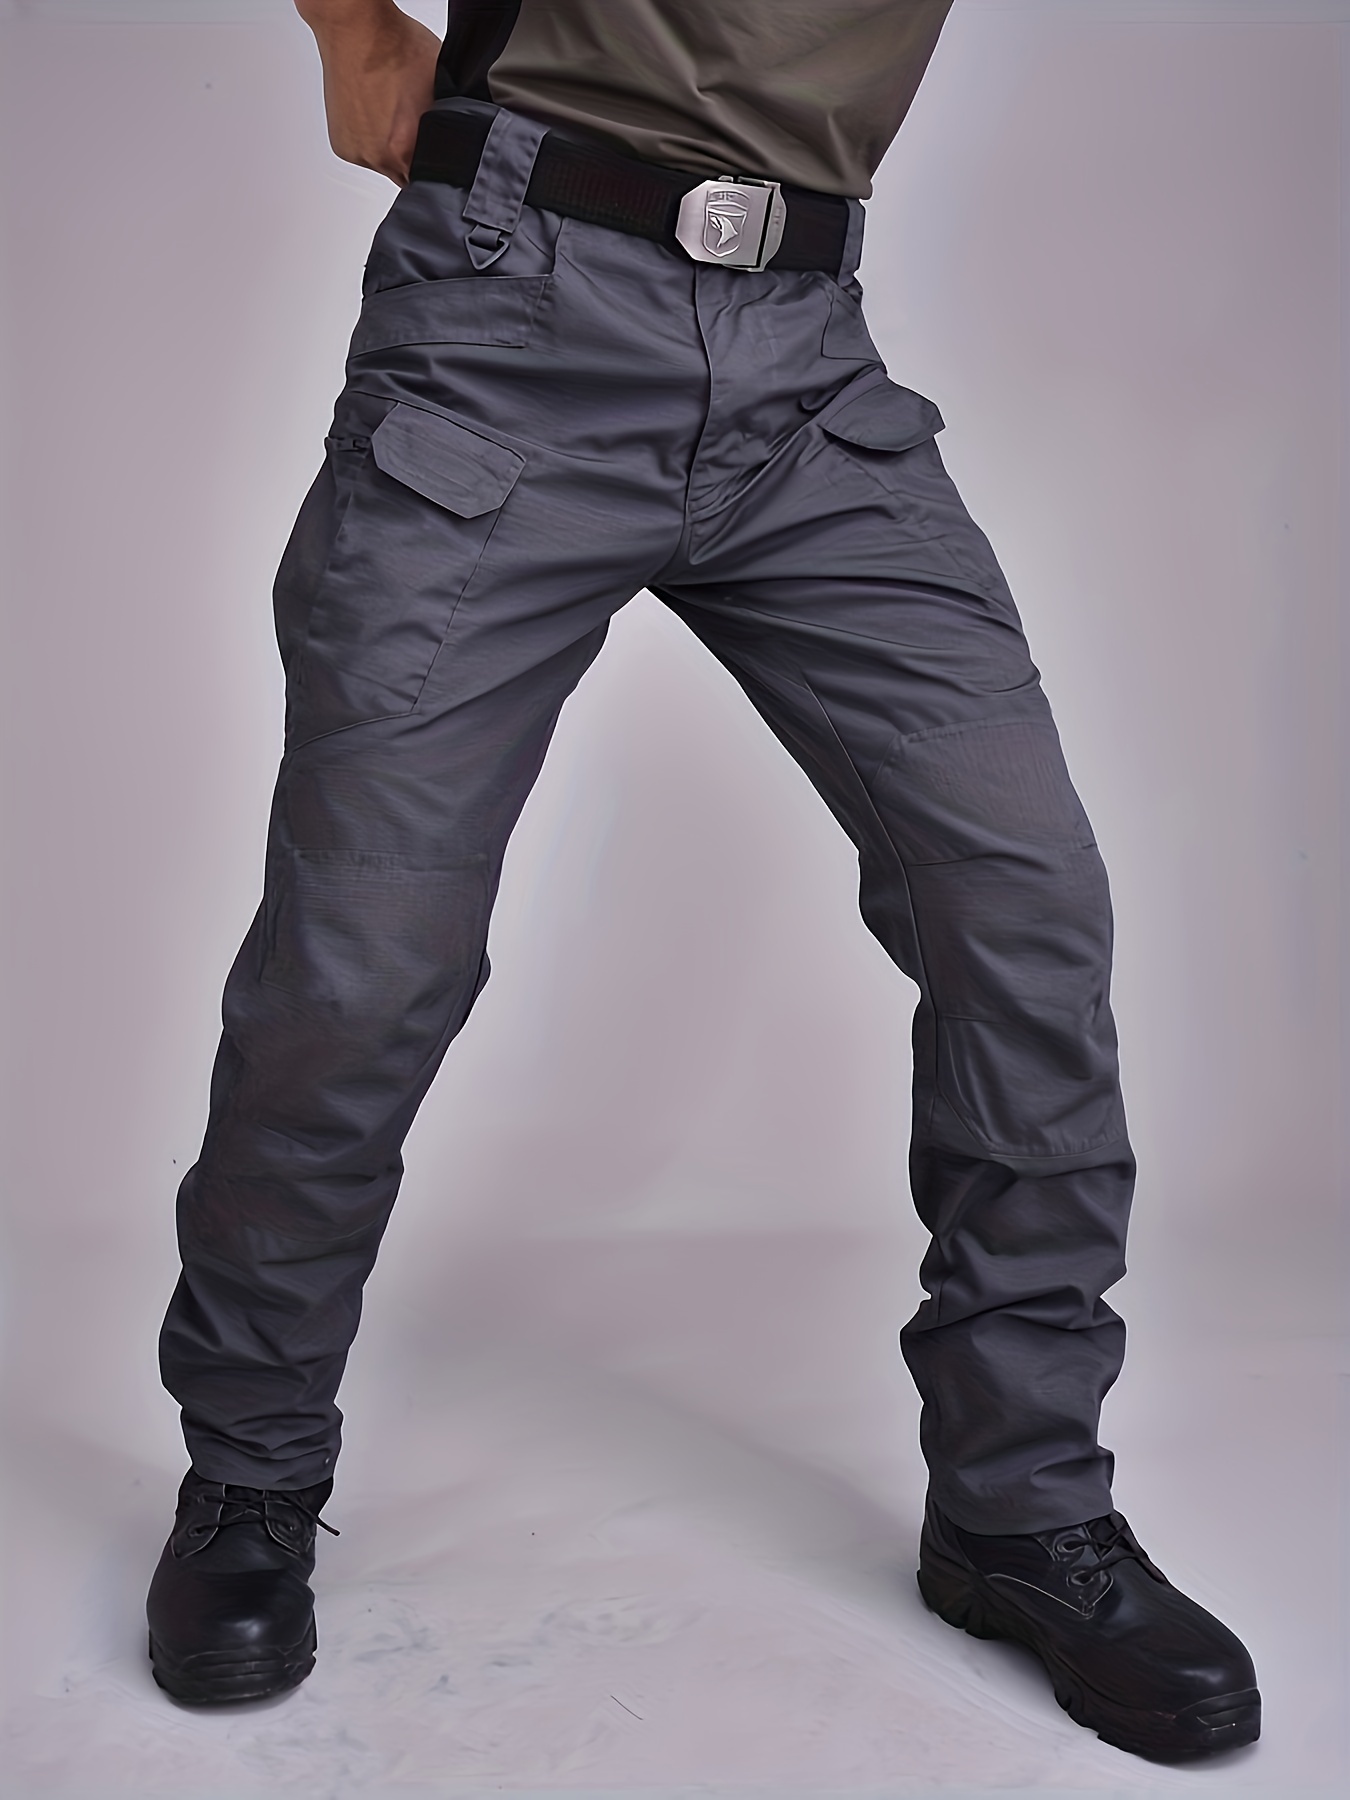 Mens Cargo Military Trousers Six Pocket Army Combat Pants Casual Outdoor  Slacks